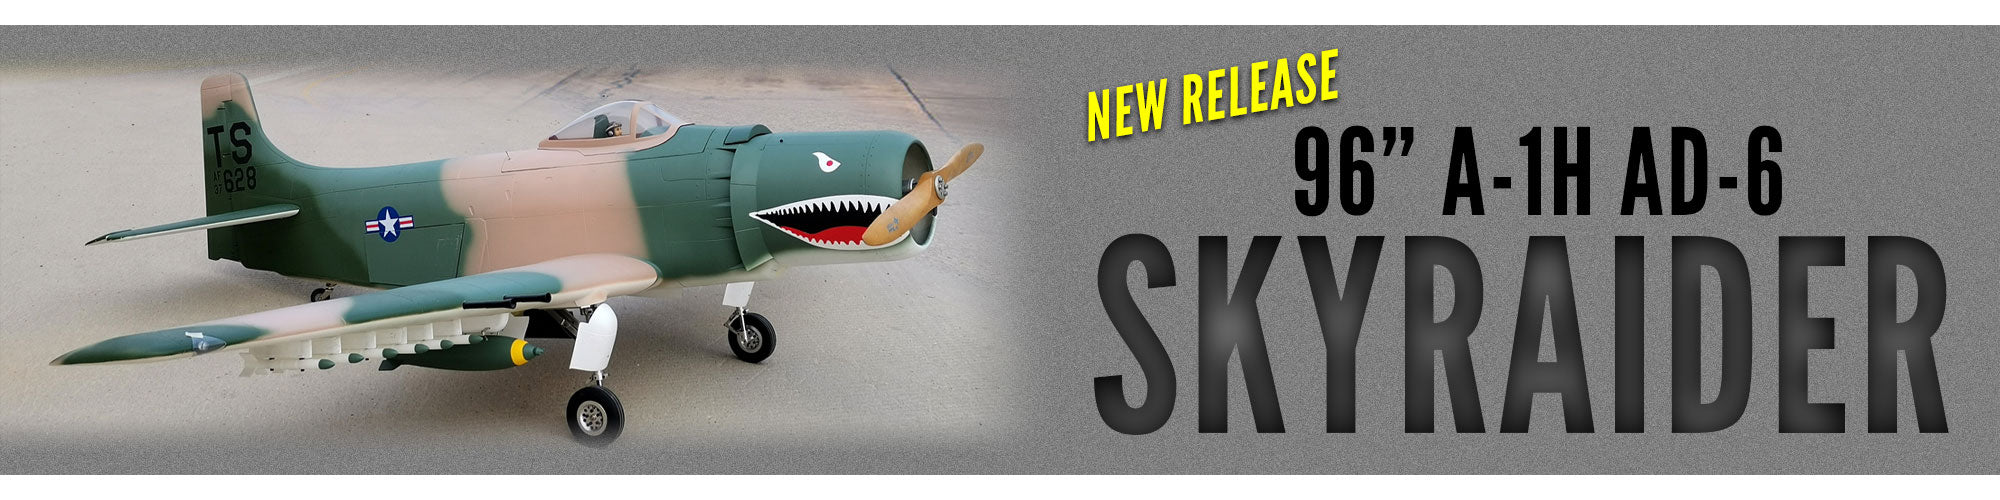 Shop our large scale RC Skyraider plane